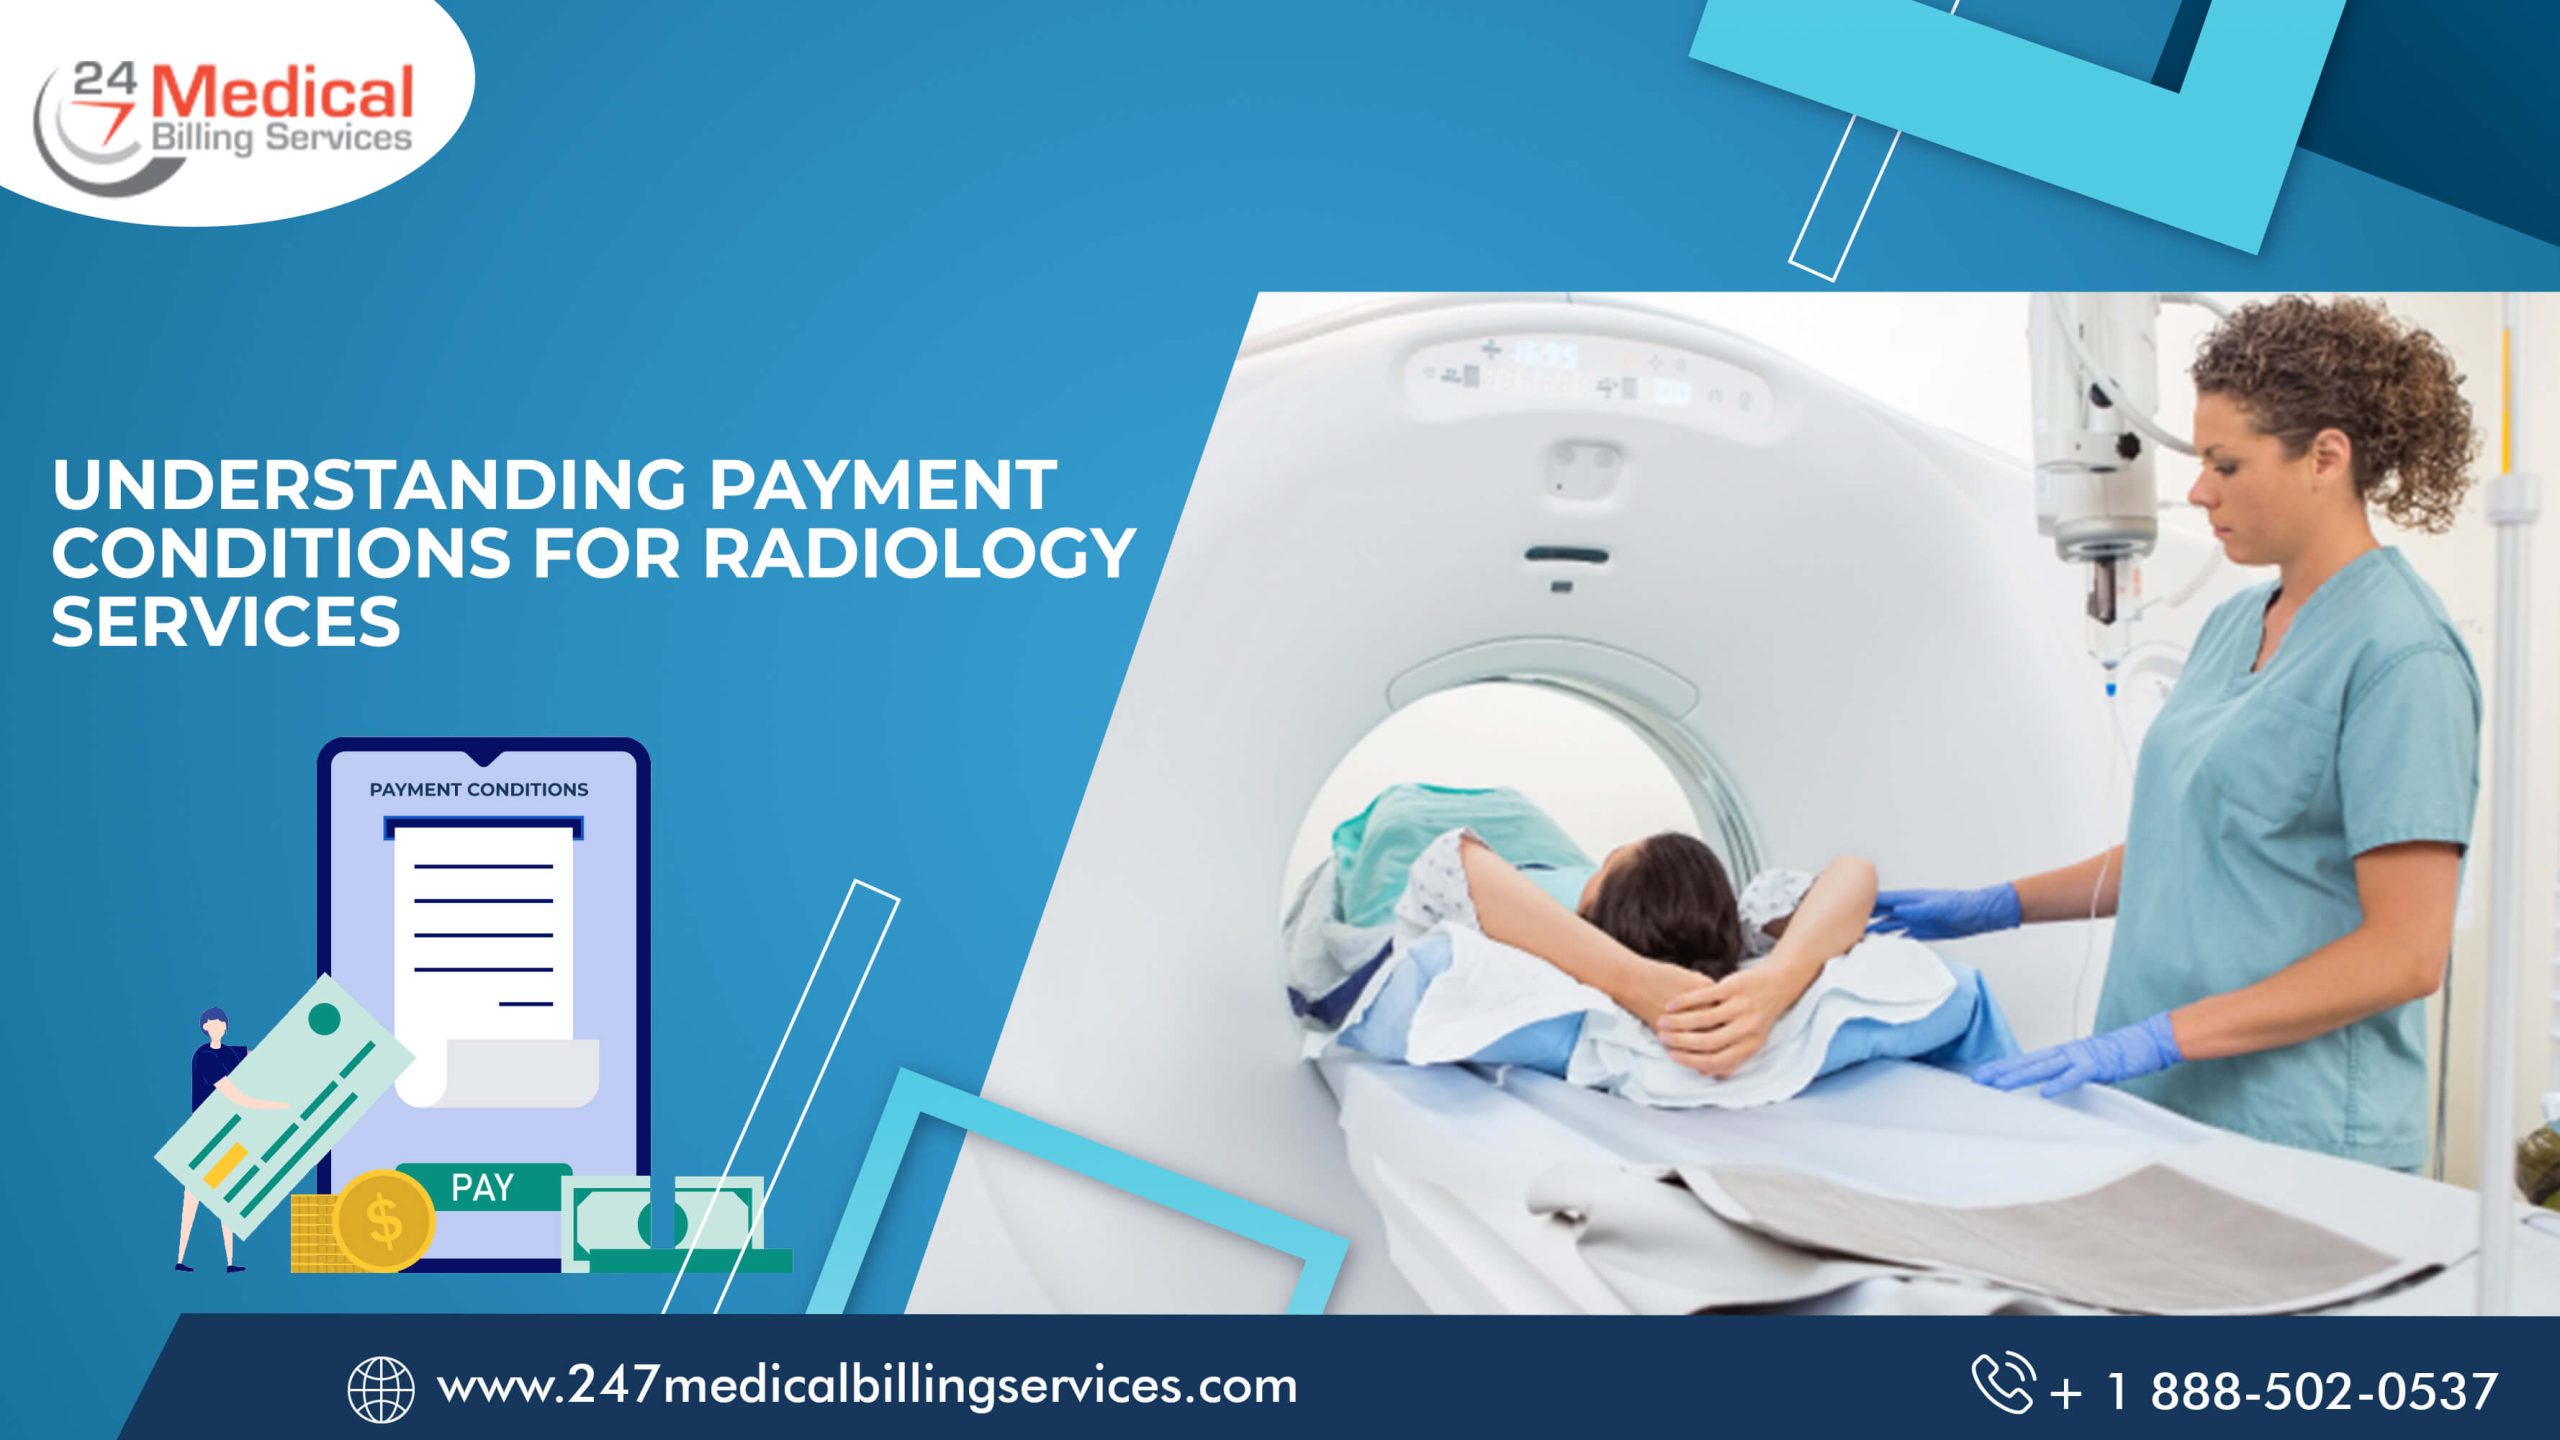  Understanding Payment Conditions for Radiology Services